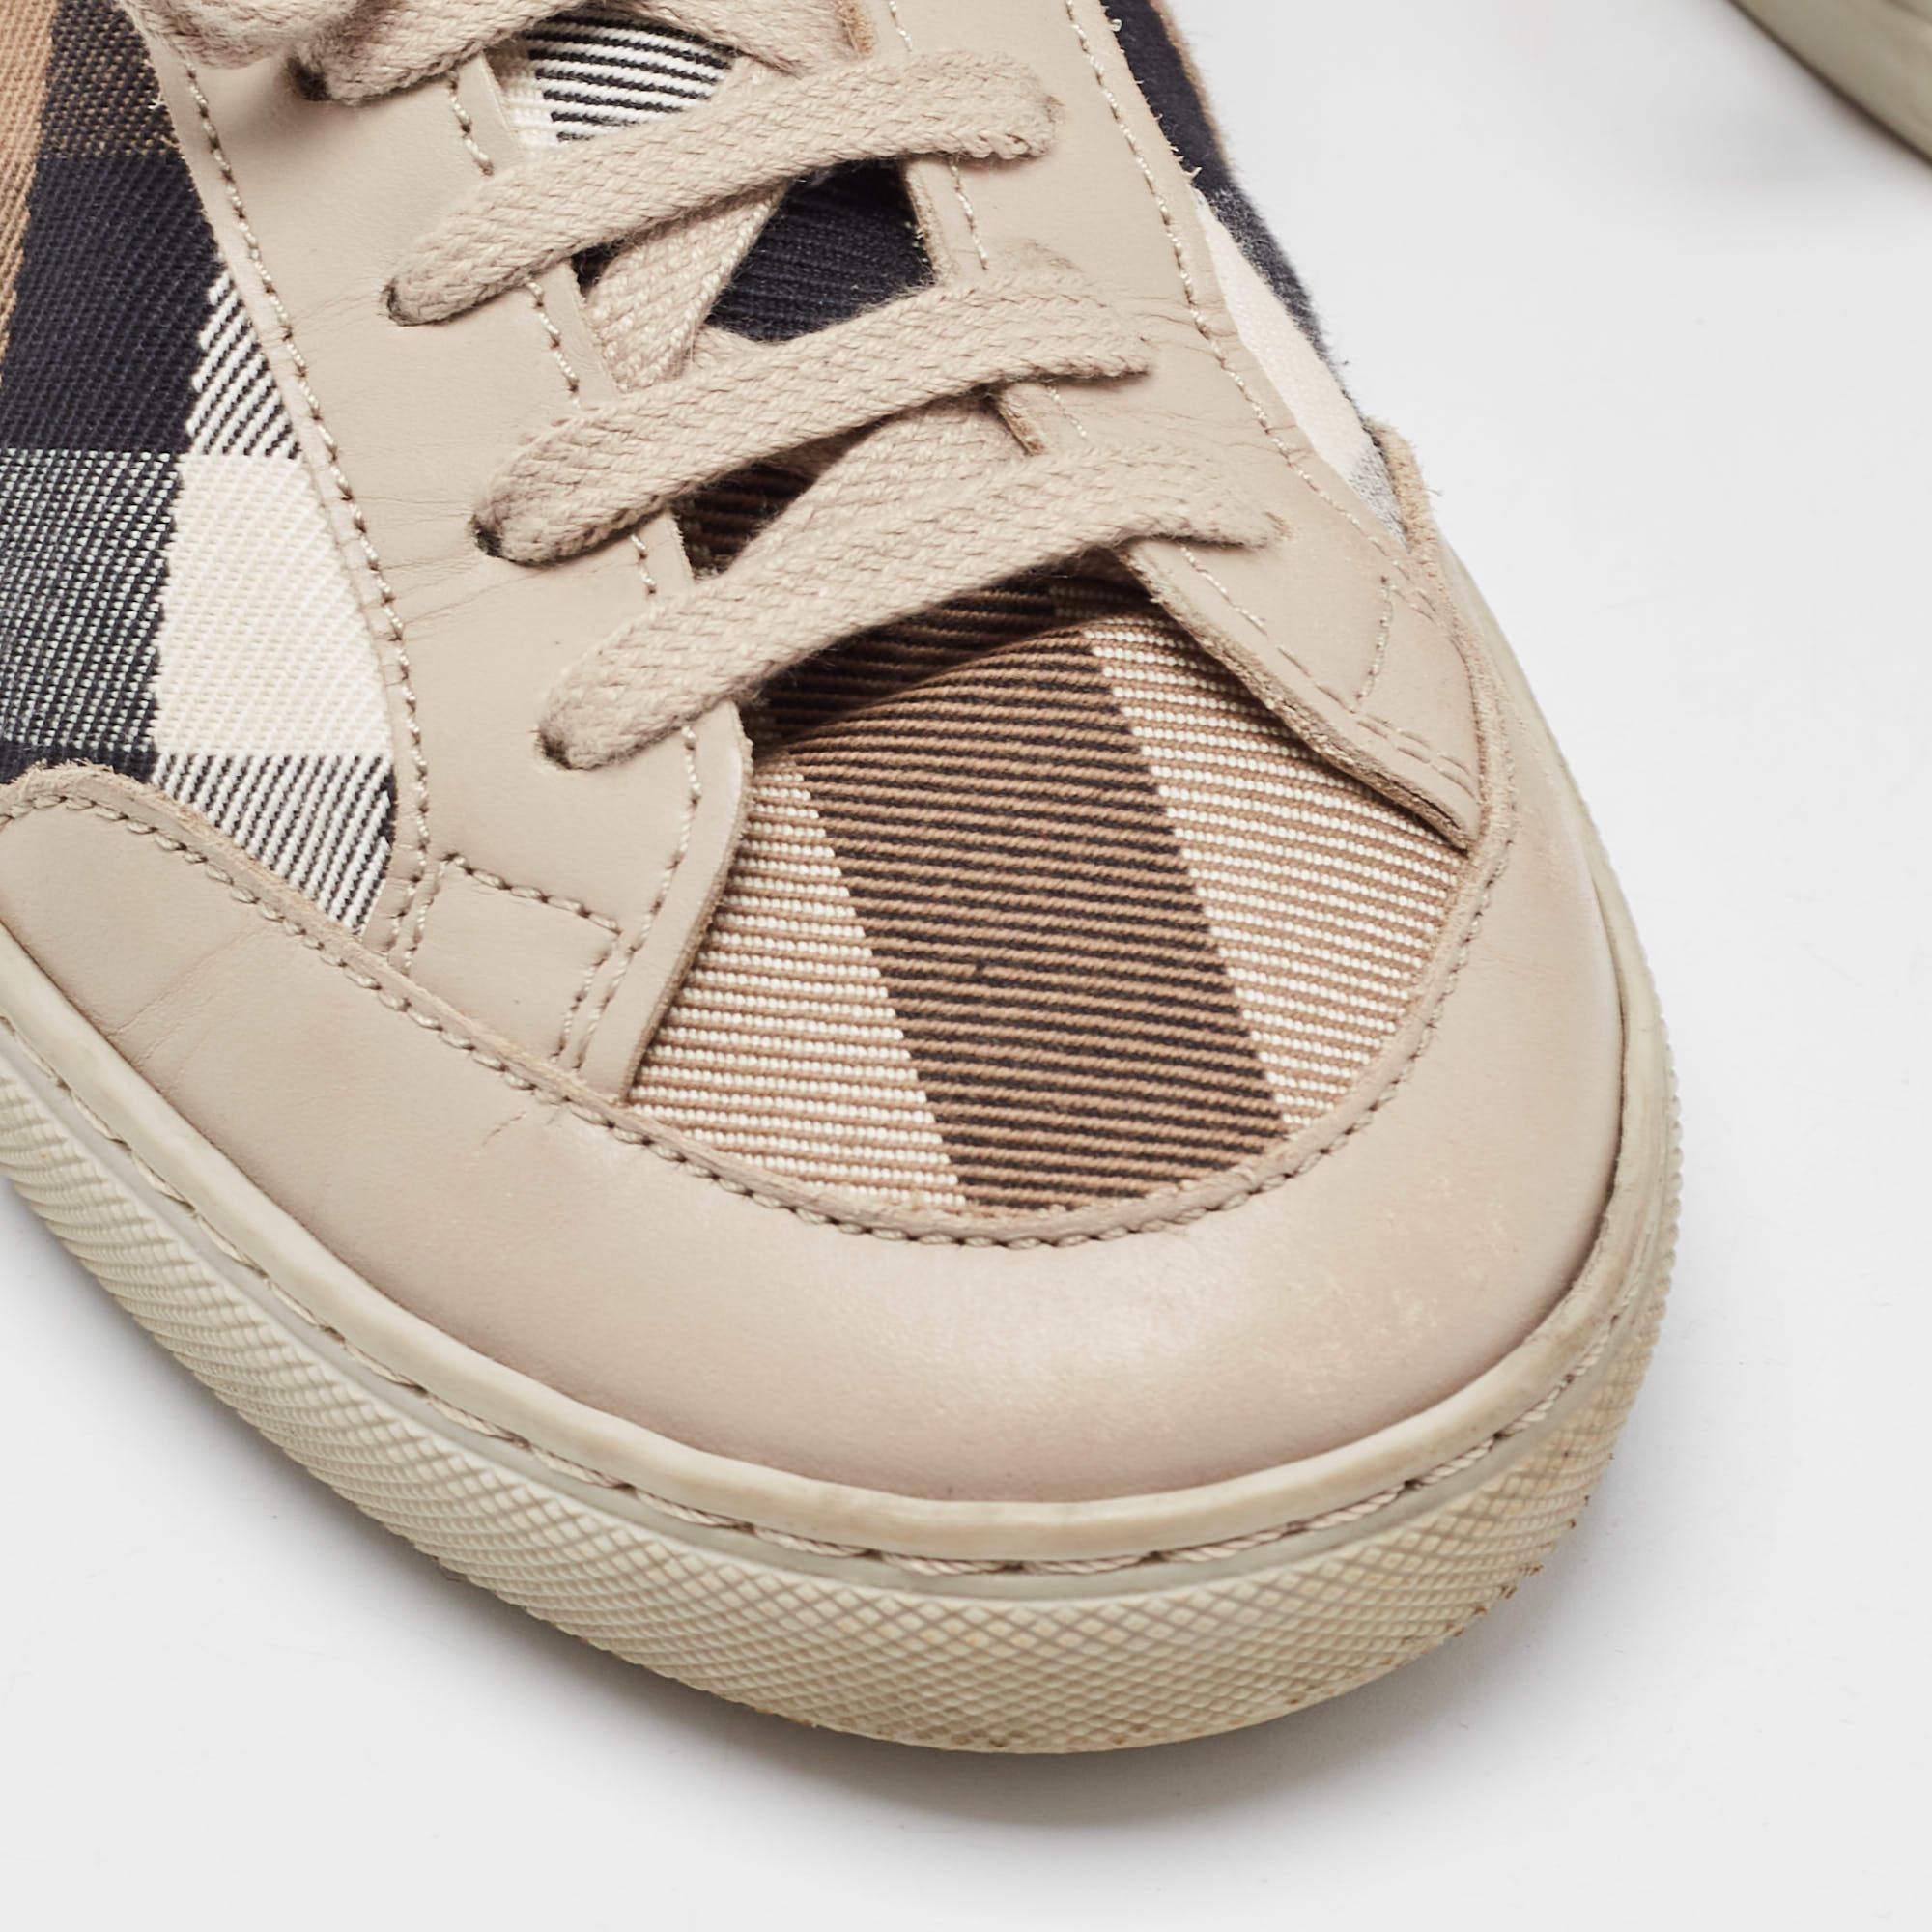 Burberry Beige/Brown Nova Check Canvas and Leather Low Top Sneakers Size 37 2